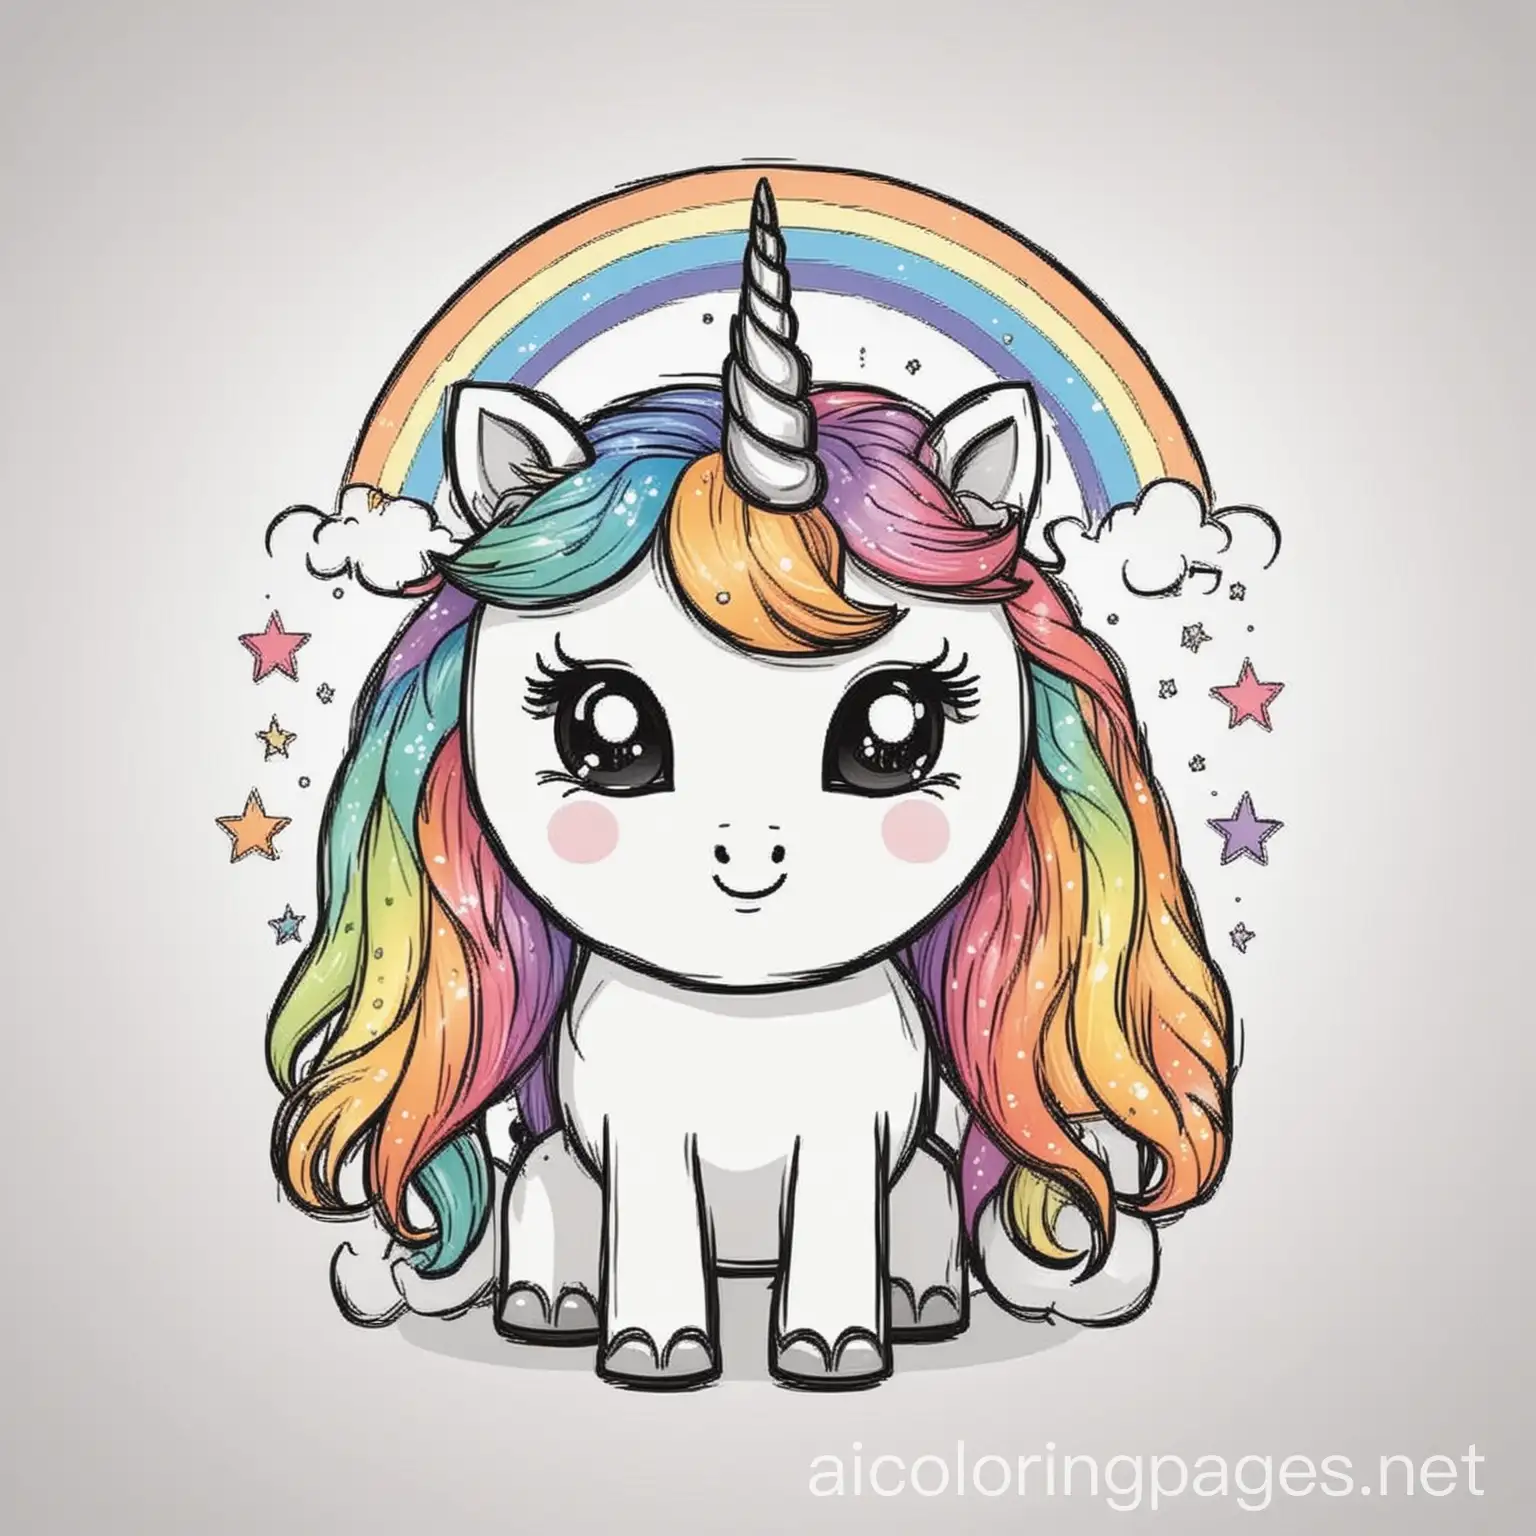 Cute unicorn with a rainbow mane, Coloring Page, black and white, line art, white background, Simplicity, Ample White Space. The background of the coloring page is plain white to make it easy for young children to color within the lines. The outlines of all the subjects are easy to distinguish, making it simple for kids to color without too much difficulty